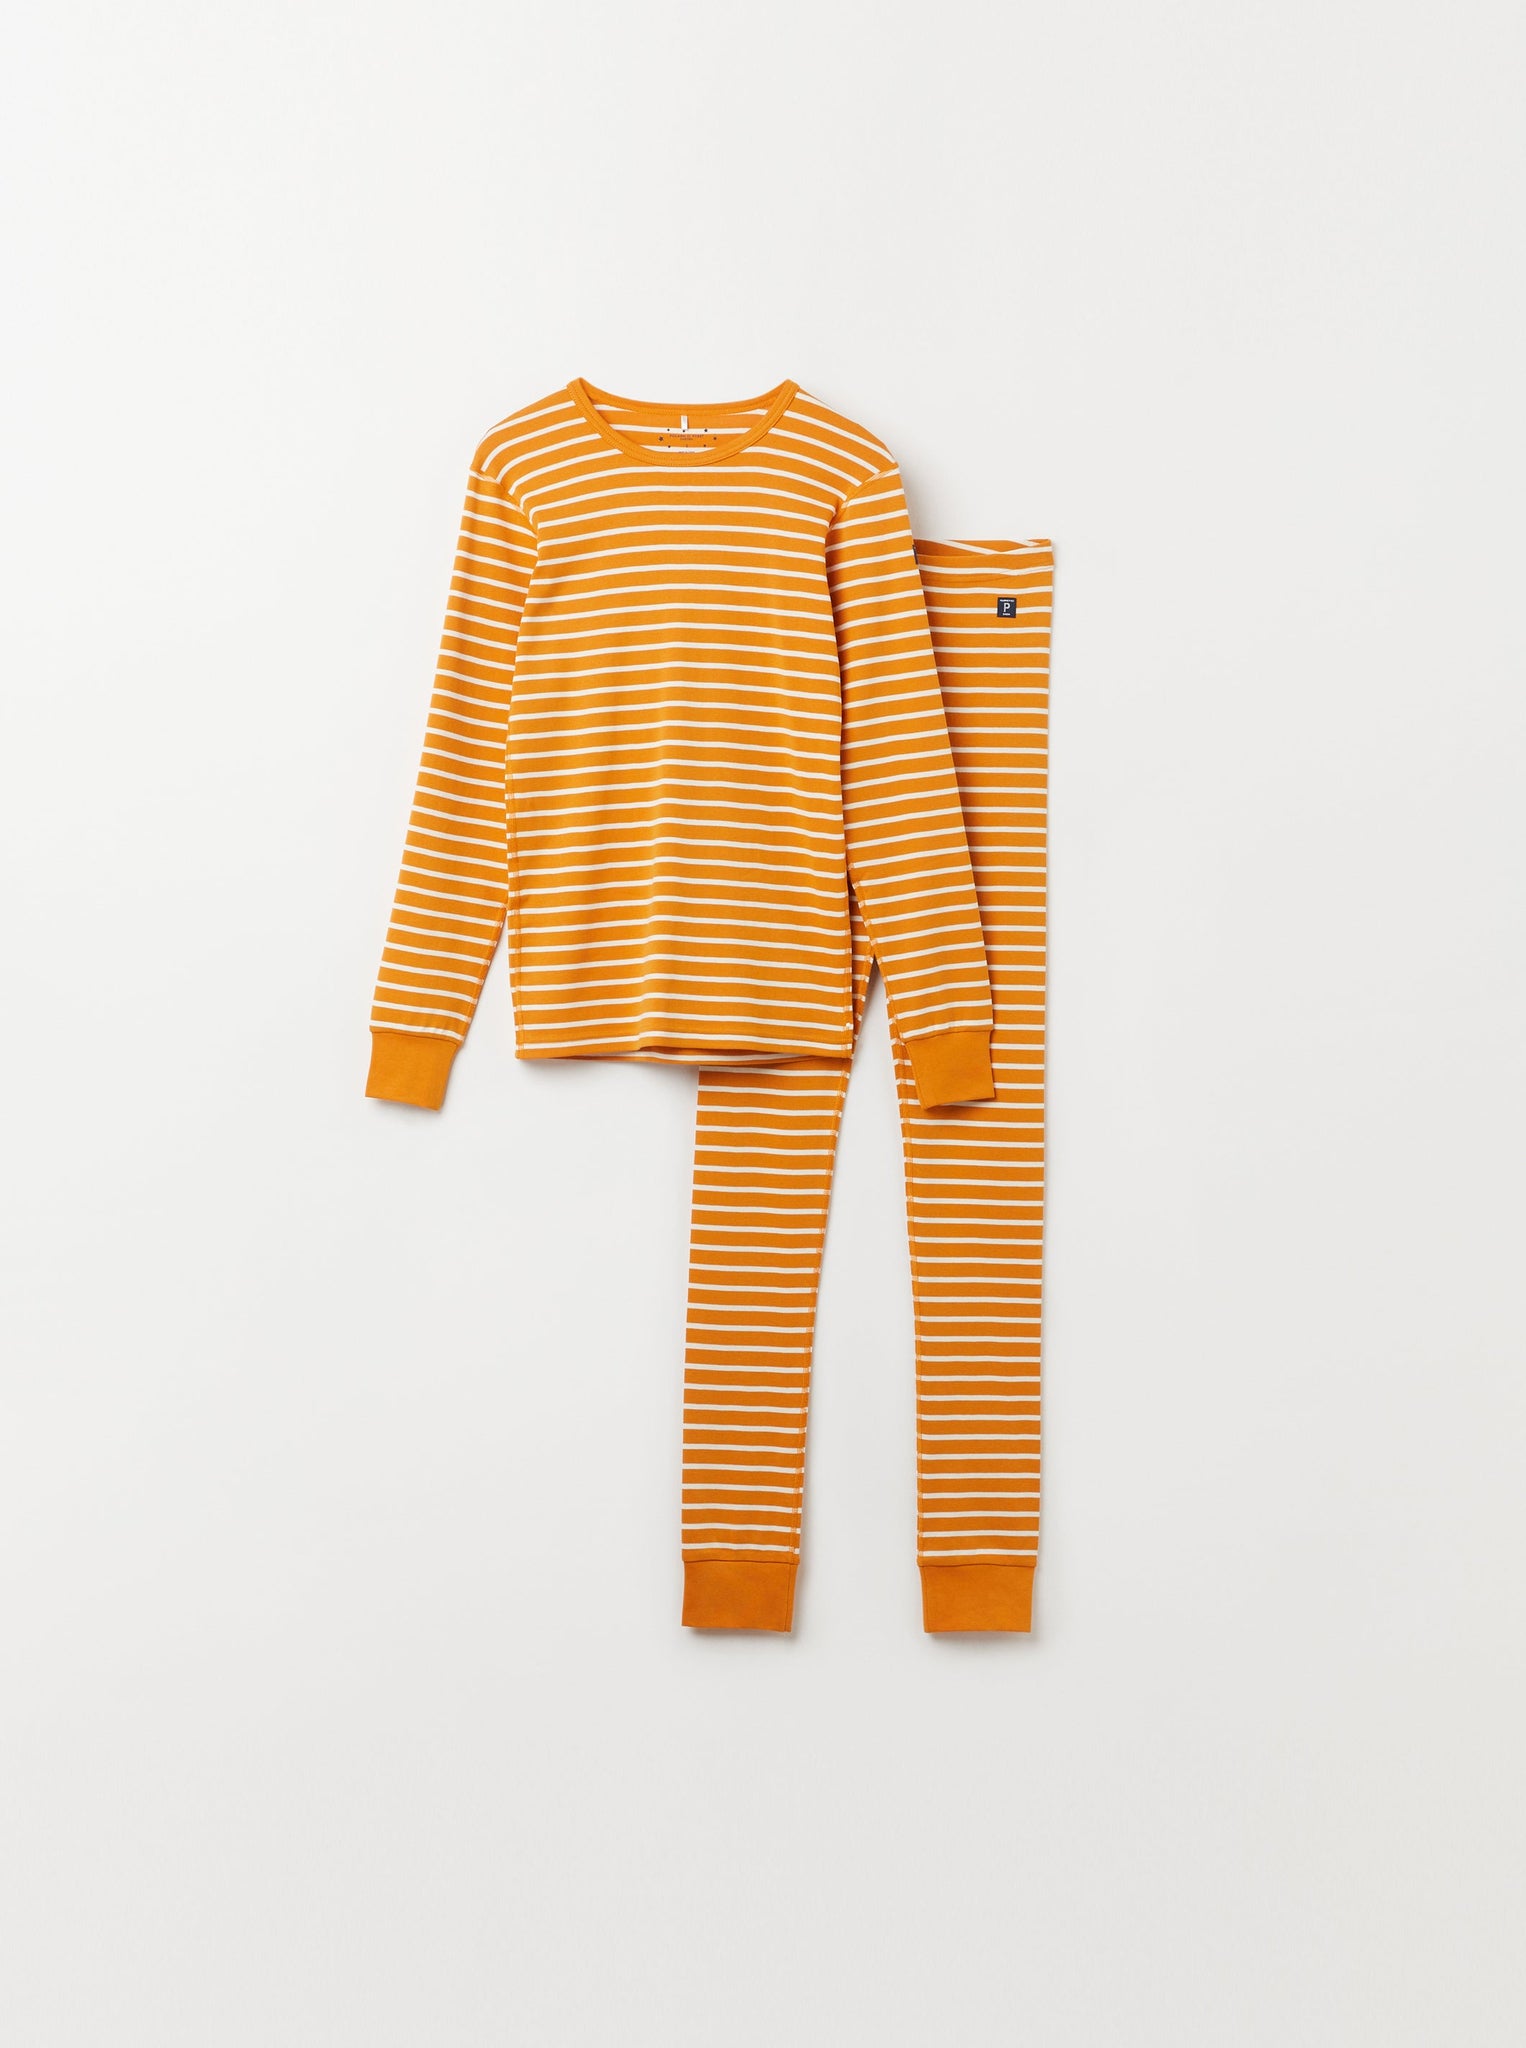 Organic Cotton Yellow Adult Pyjamas from the Polarn O. Pyret adult collection. Nordic nightwear made from sustainable sources.